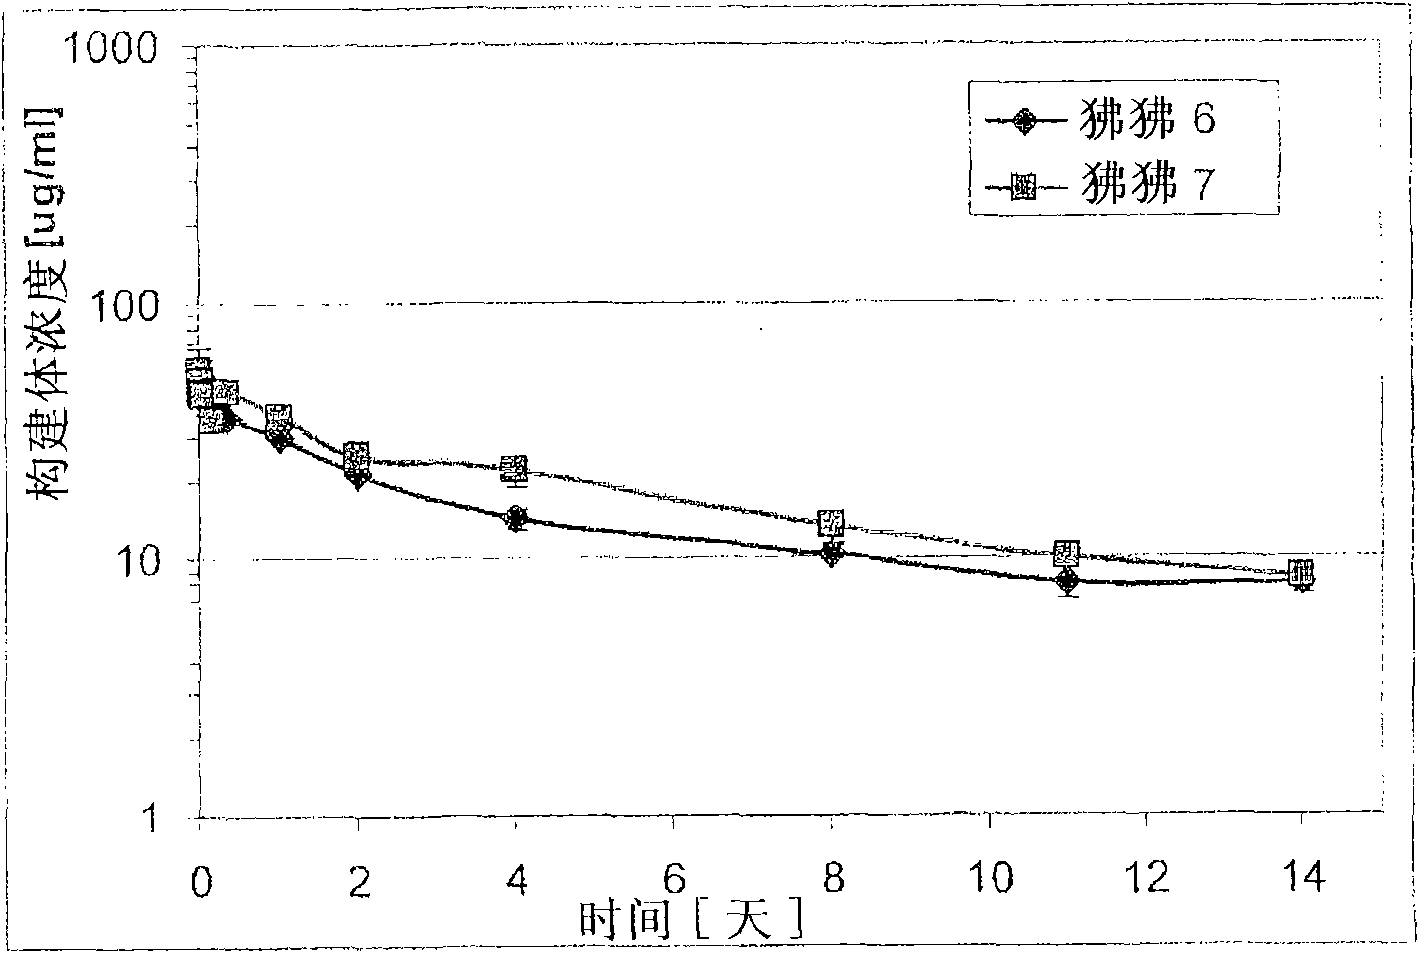 Serum albumin binding proteins with long half-lives